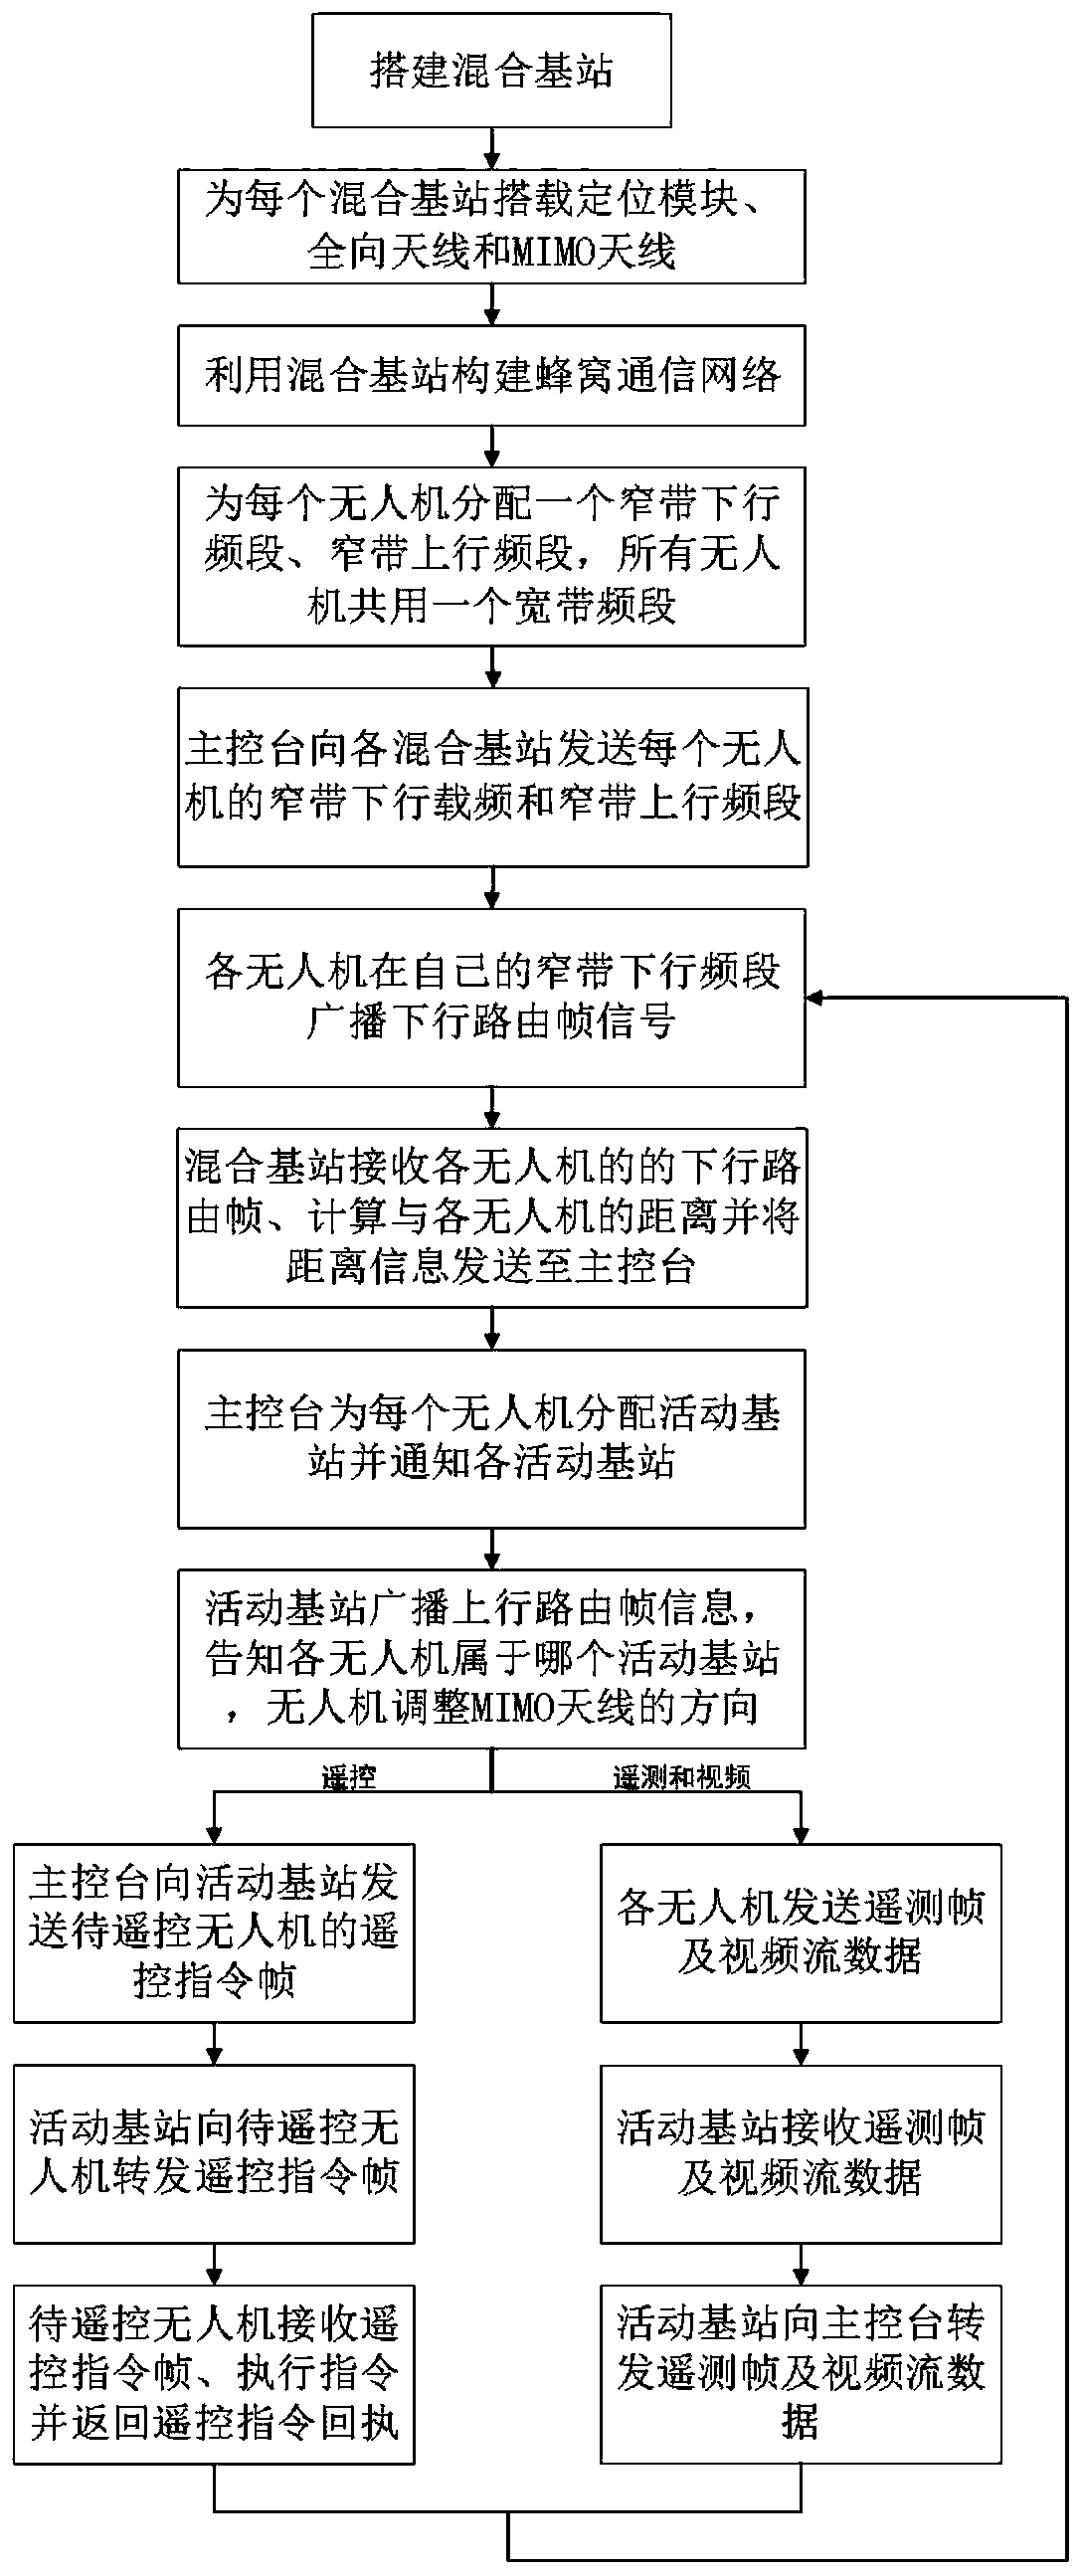 FDMA-based unmanned aerial vehicle measurement and control cellular communication method